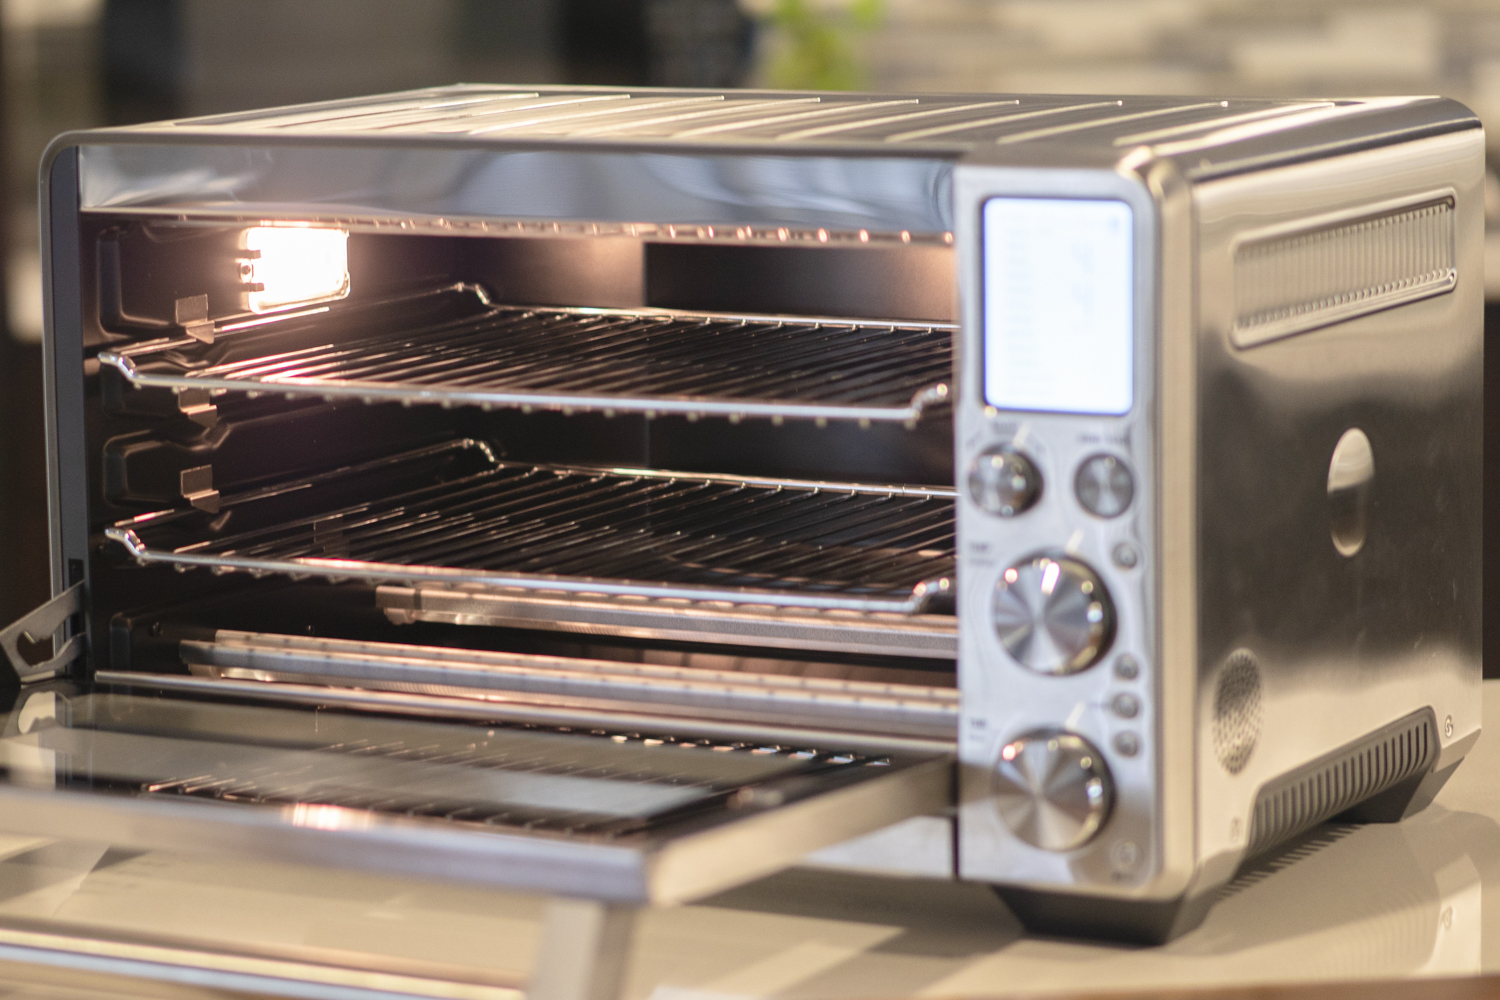 Breville BOV900BSS Toaster oven